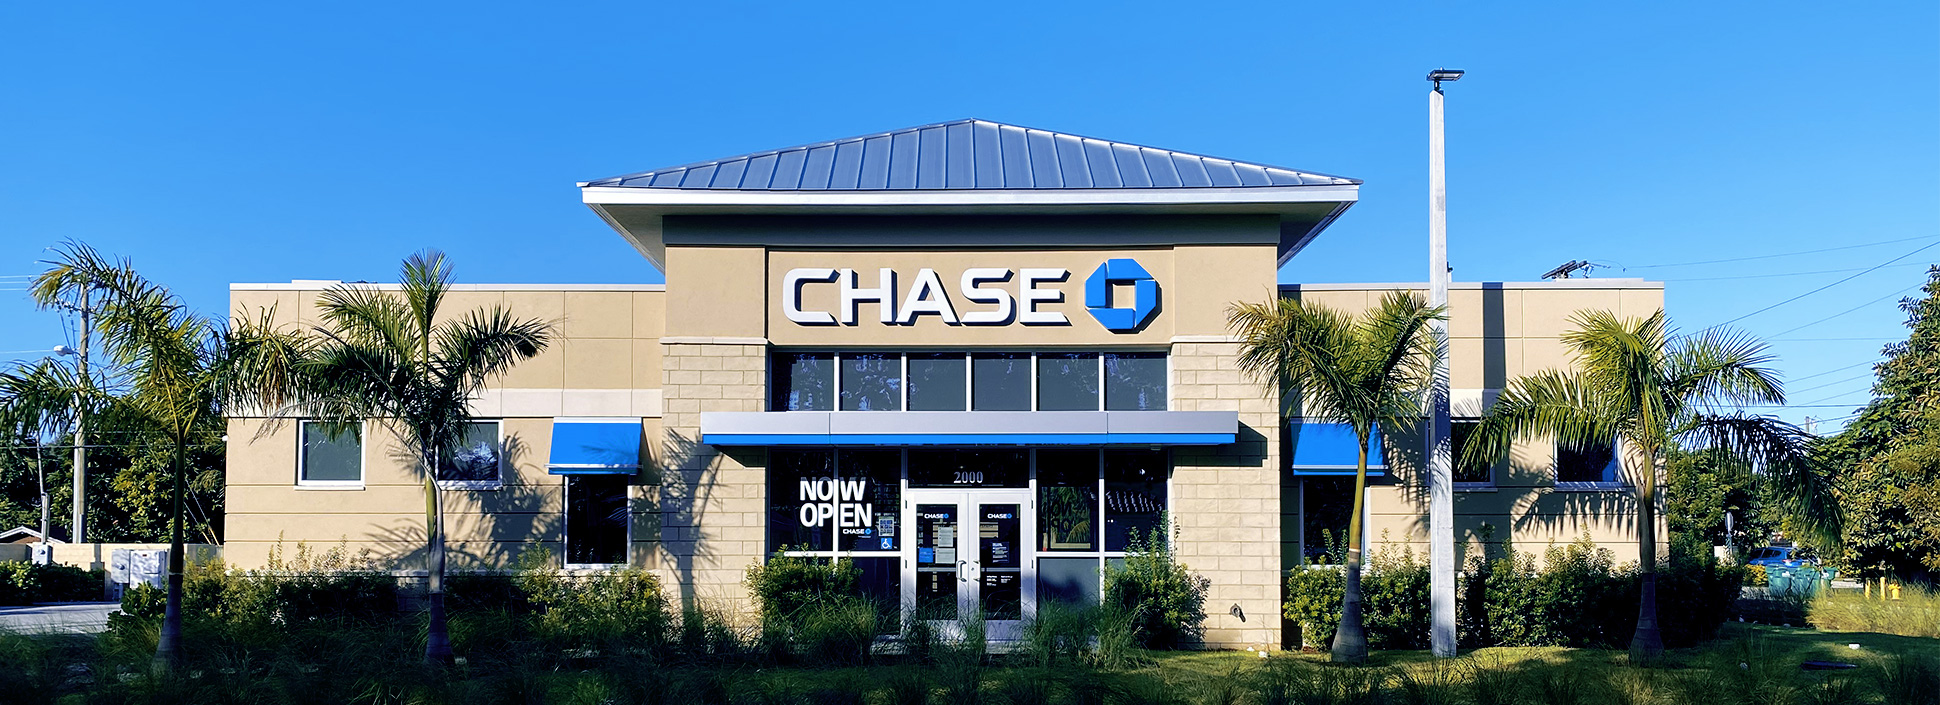 what time does chase bank close on sunday